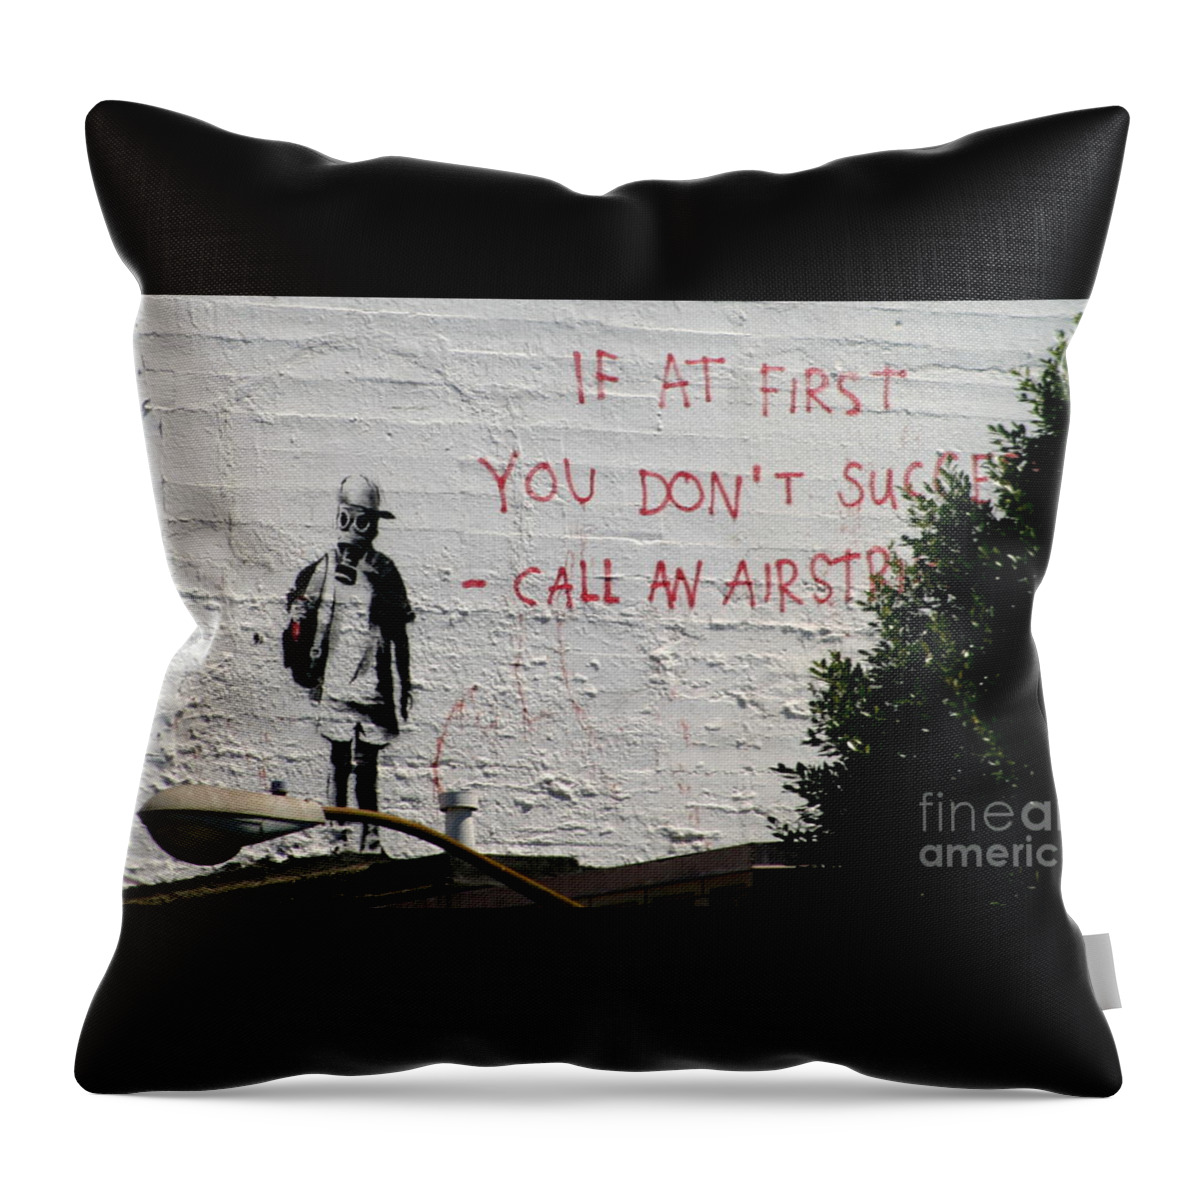 San Francisco Photography Throw Pillow featuring the photograph Bansky Art In San Francisco California by Michael Hoard